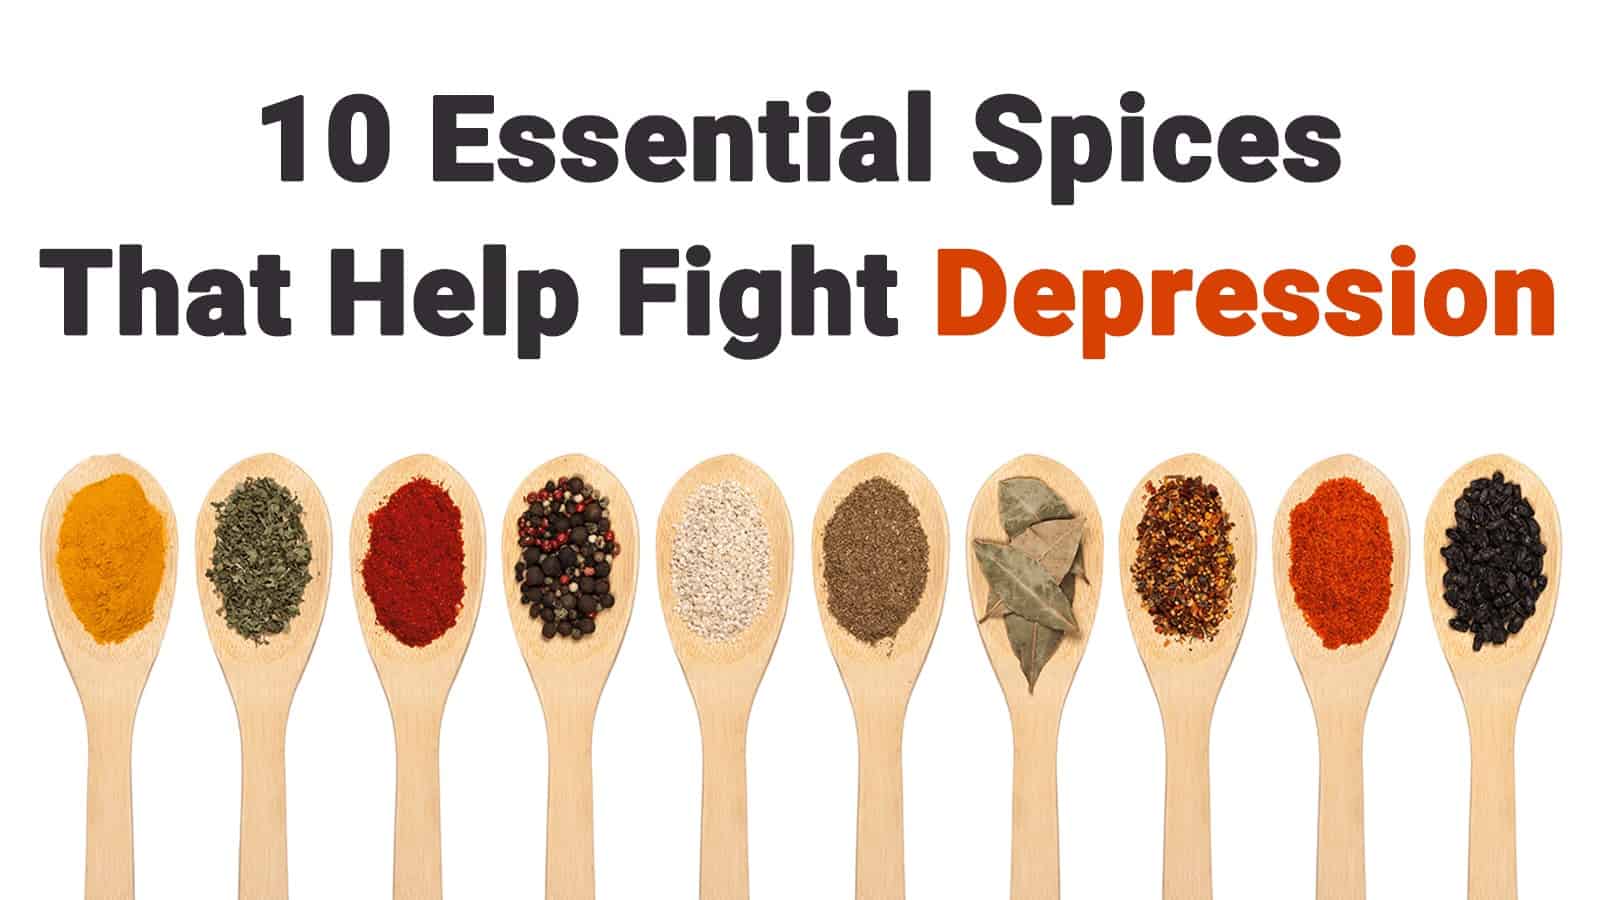 10 Essential Spices That Help Fight Depression